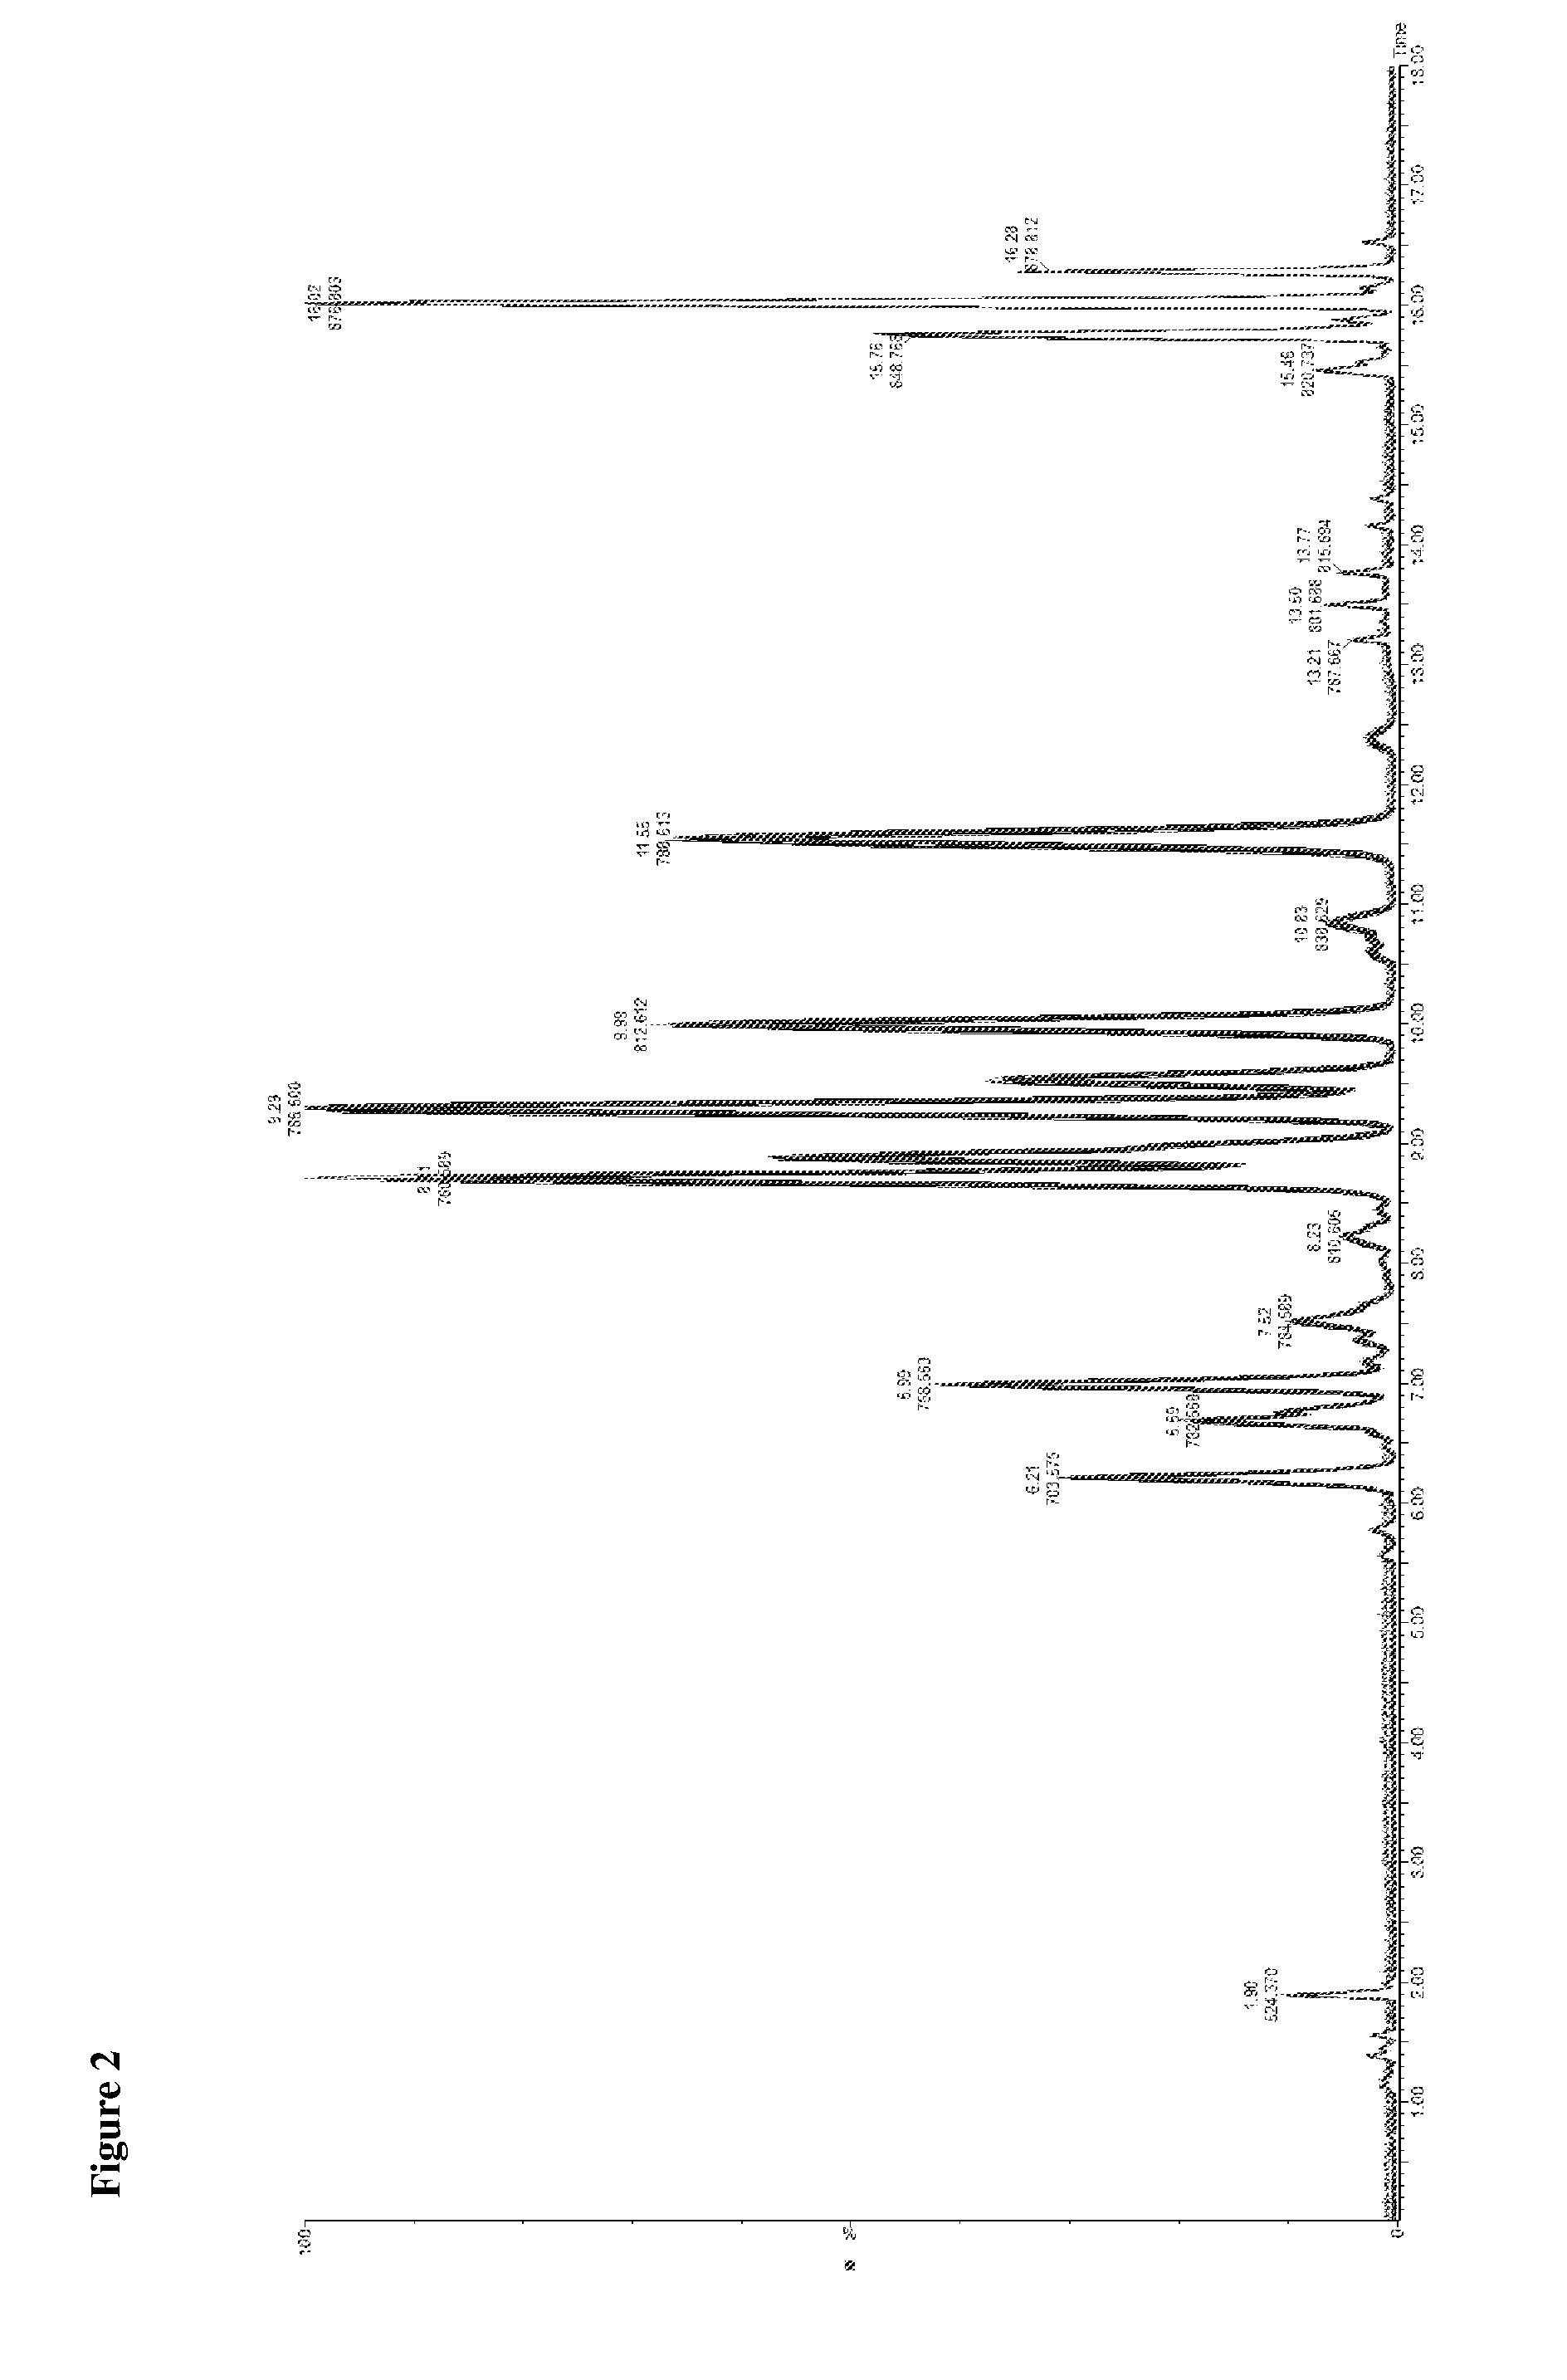 Method of separation of lipid and biological molecular species using high purity chromatographic materials comprising an ionizable modifier